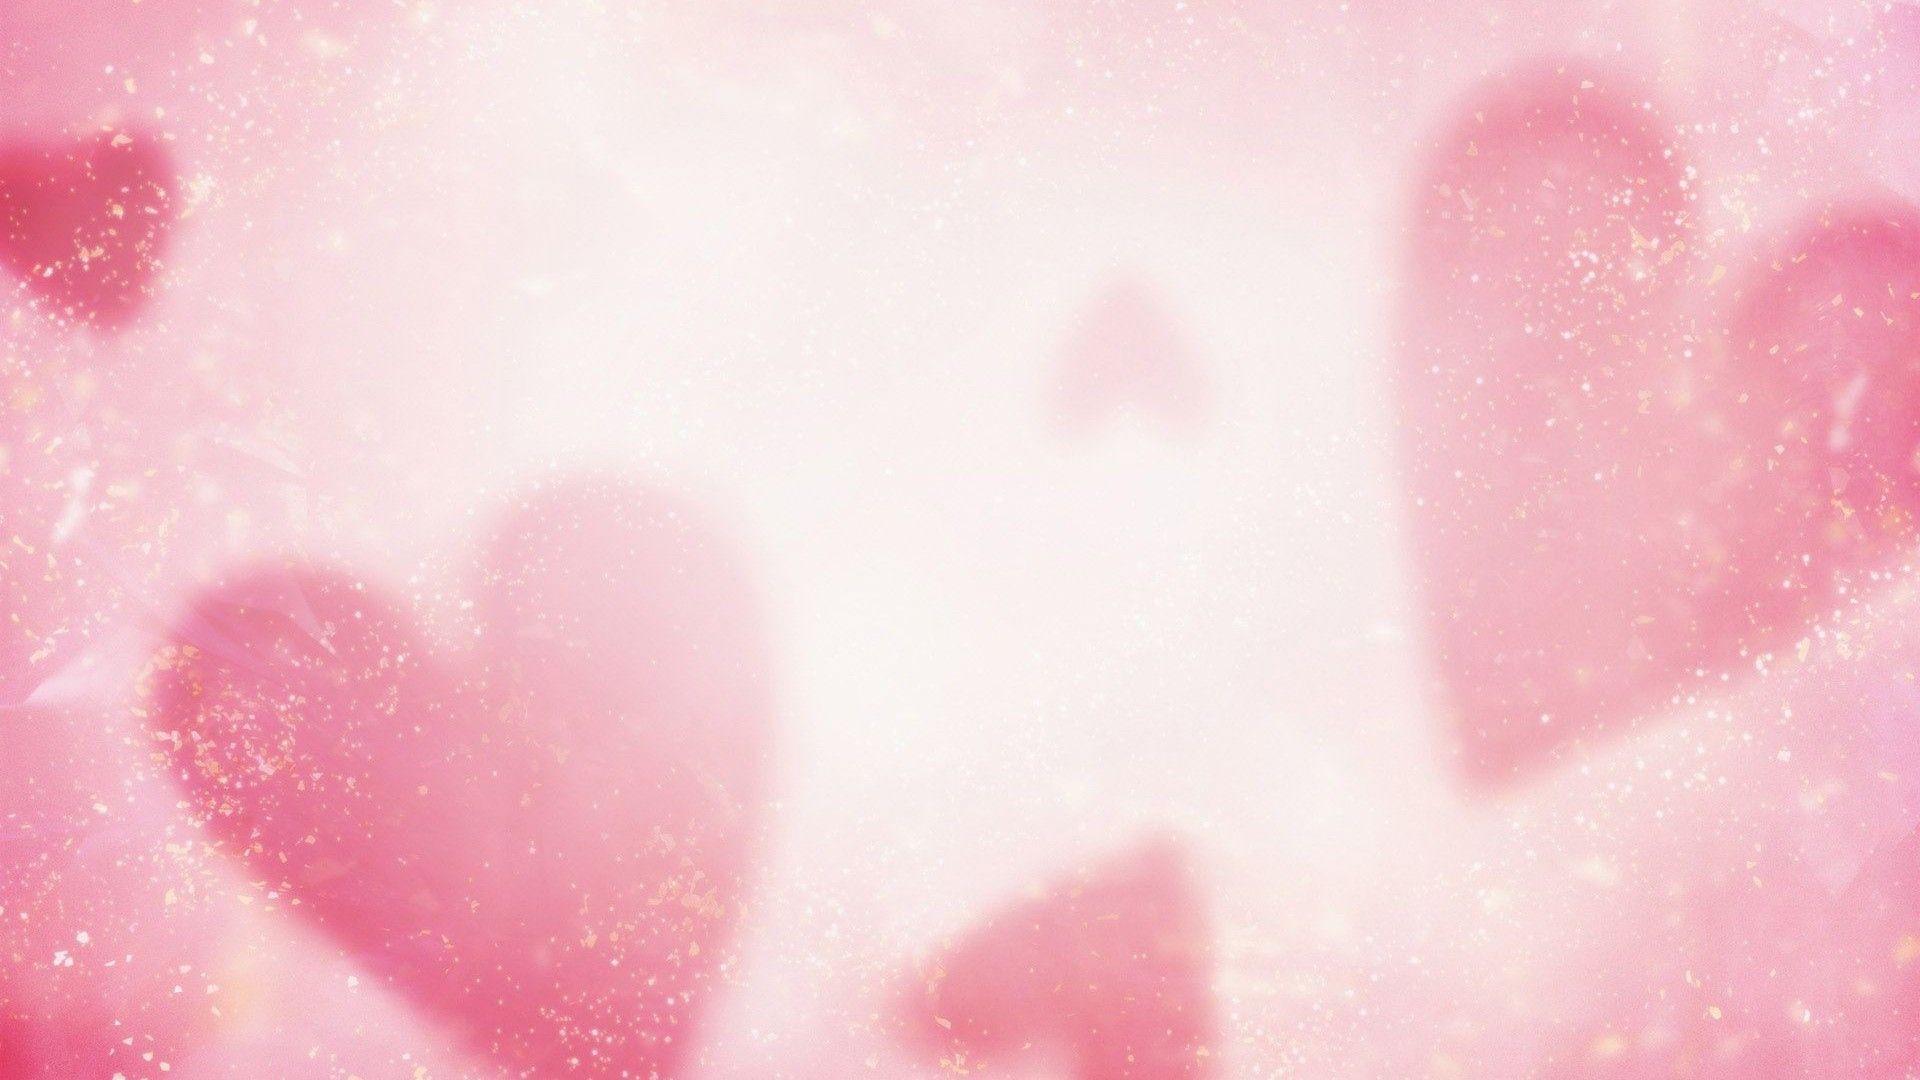 Wallpaper For > Pink Hearts Wallpaper Background